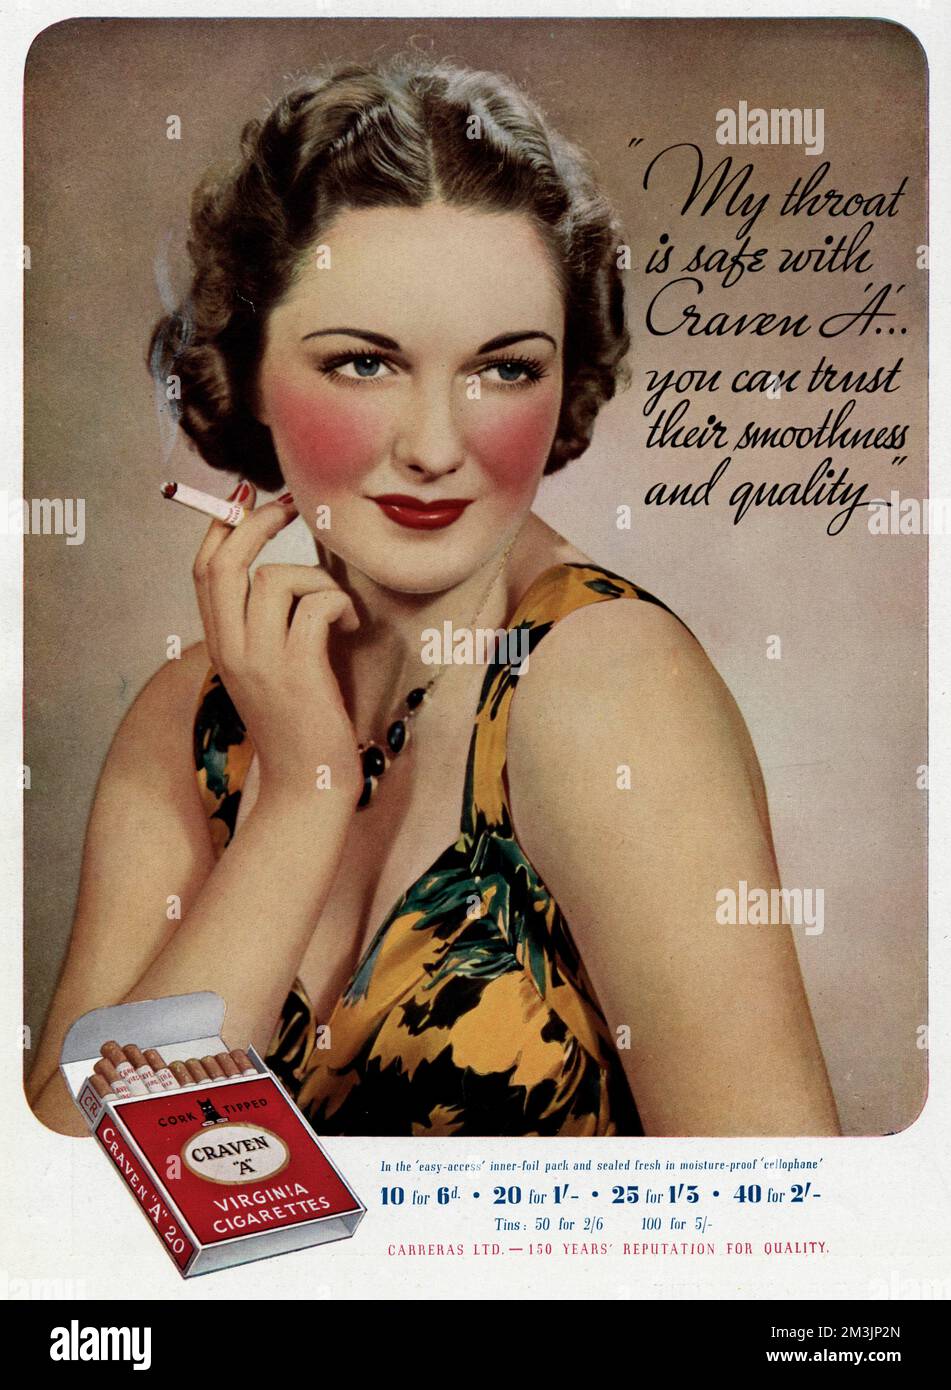 Craven A cigarettes - 'My throat is safe with Craven A . . . you can trust their smoothness and quality'.  1937 Stock Photo